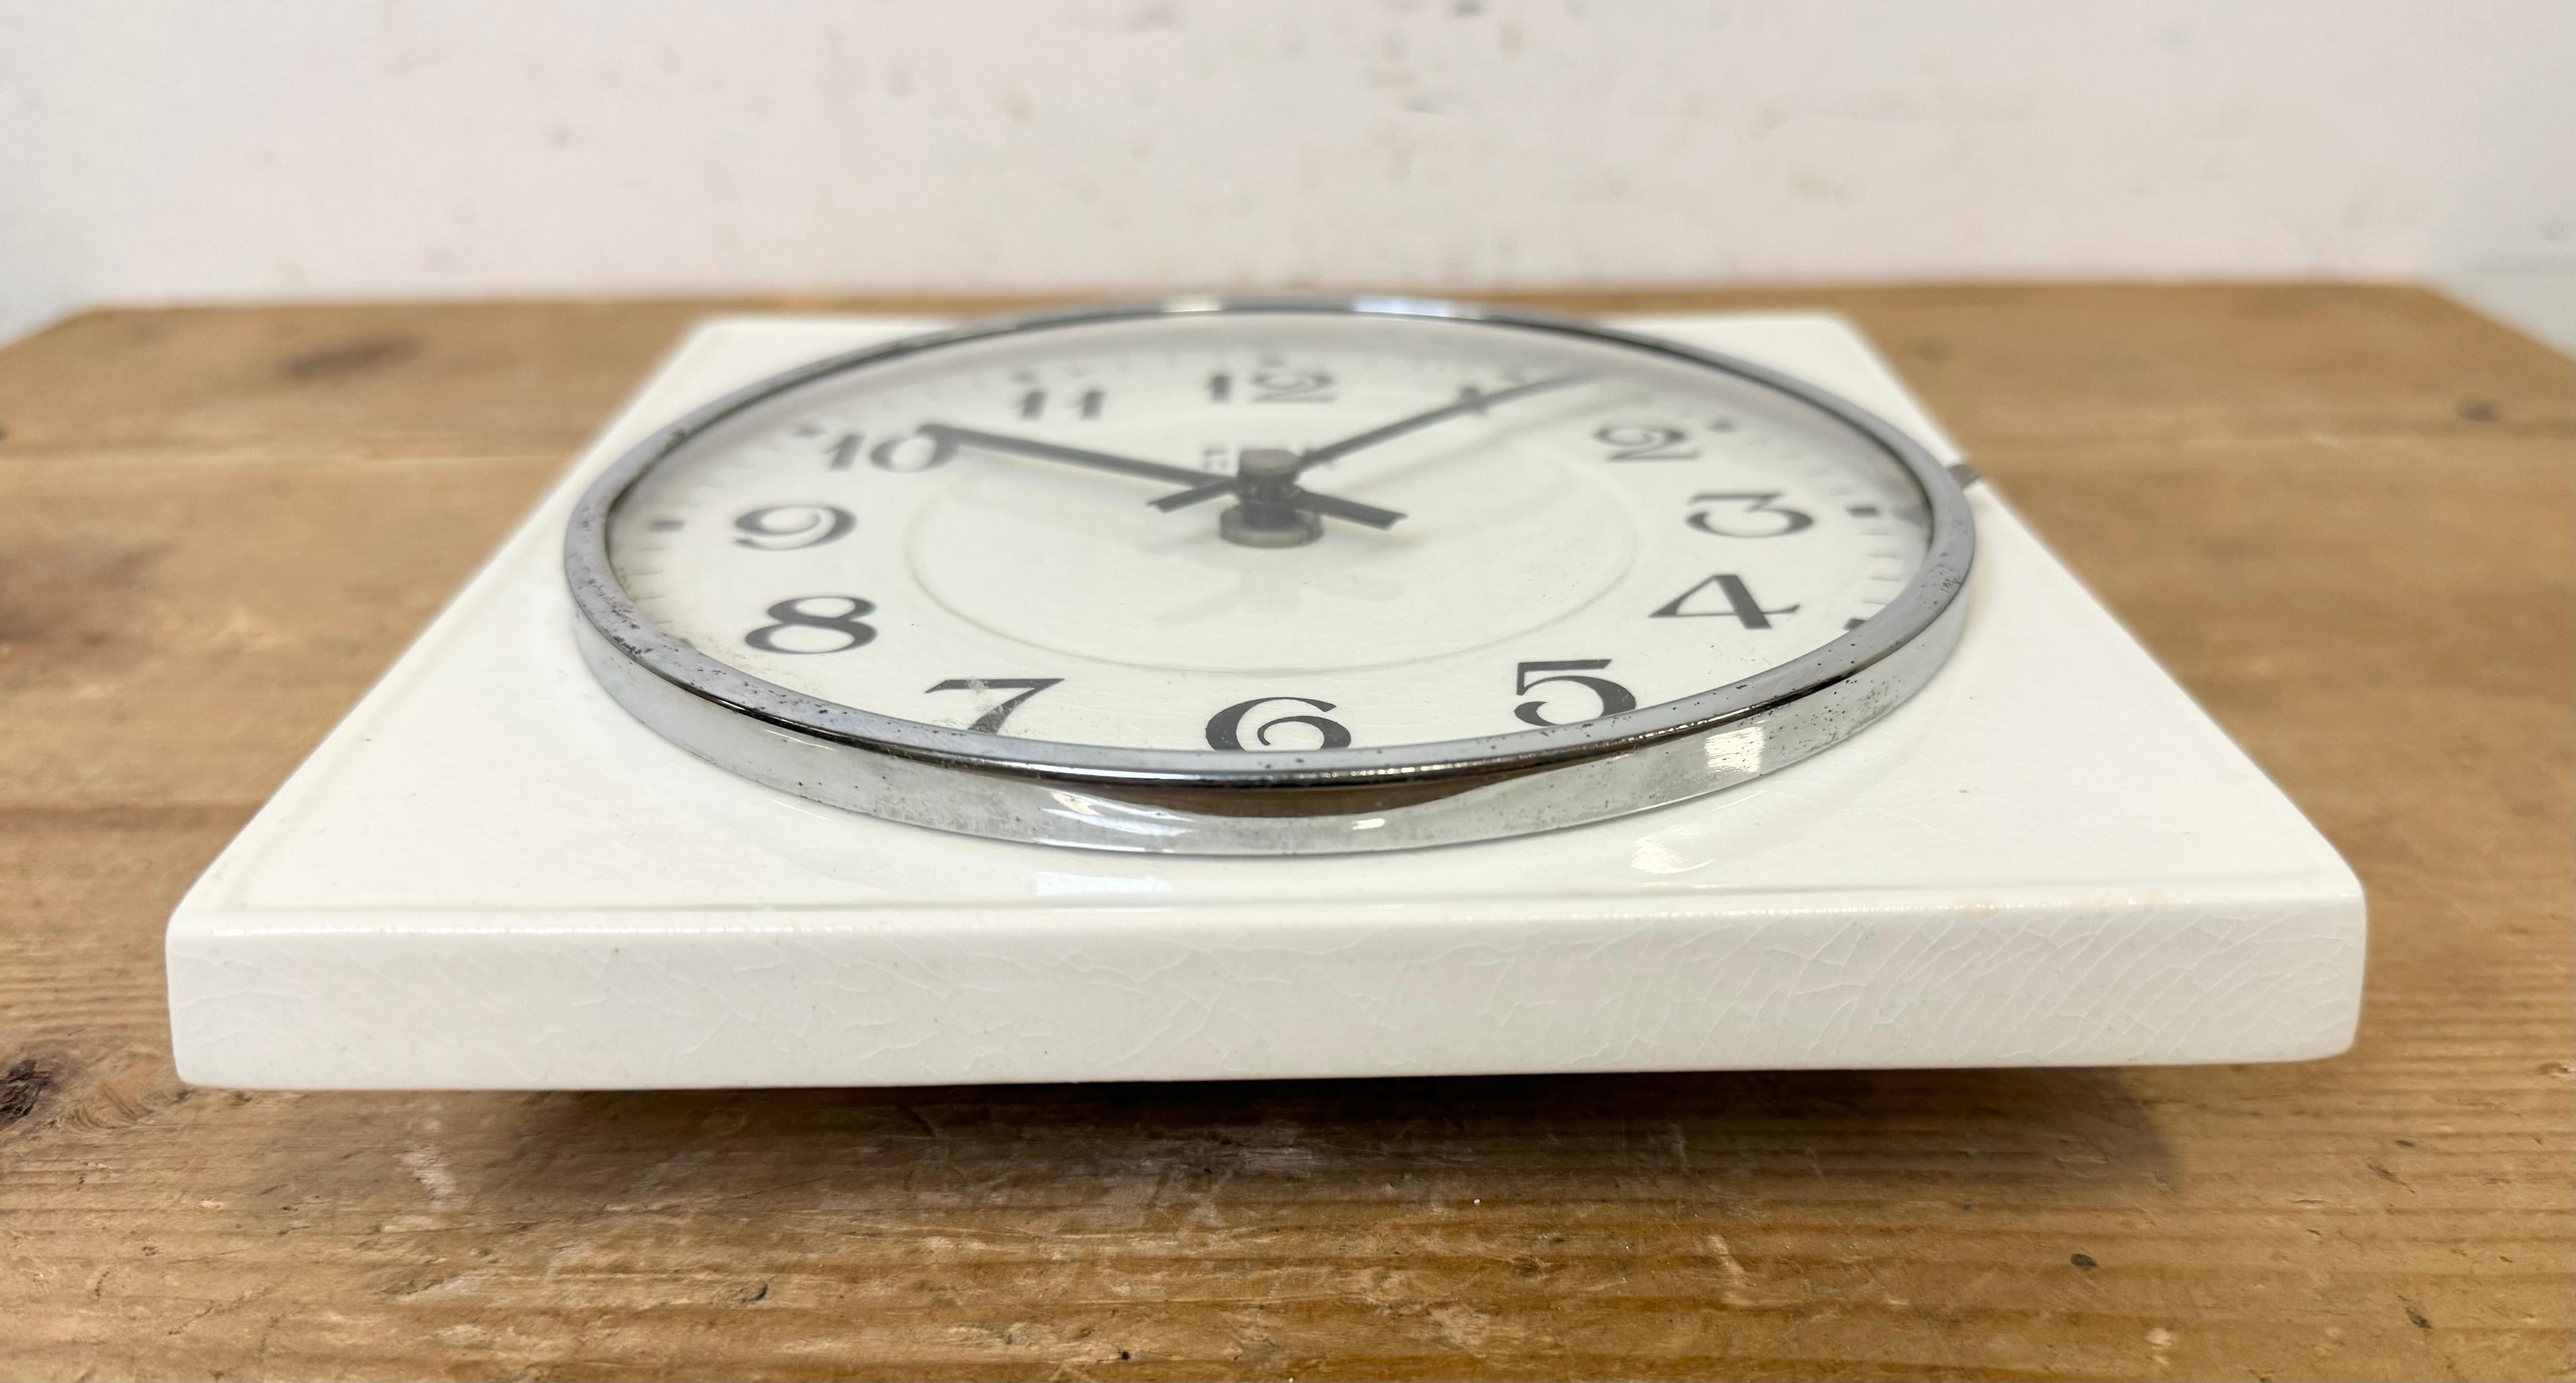 Vintage White Porcelain Wall Clock from Prim, 1970s For Sale 6